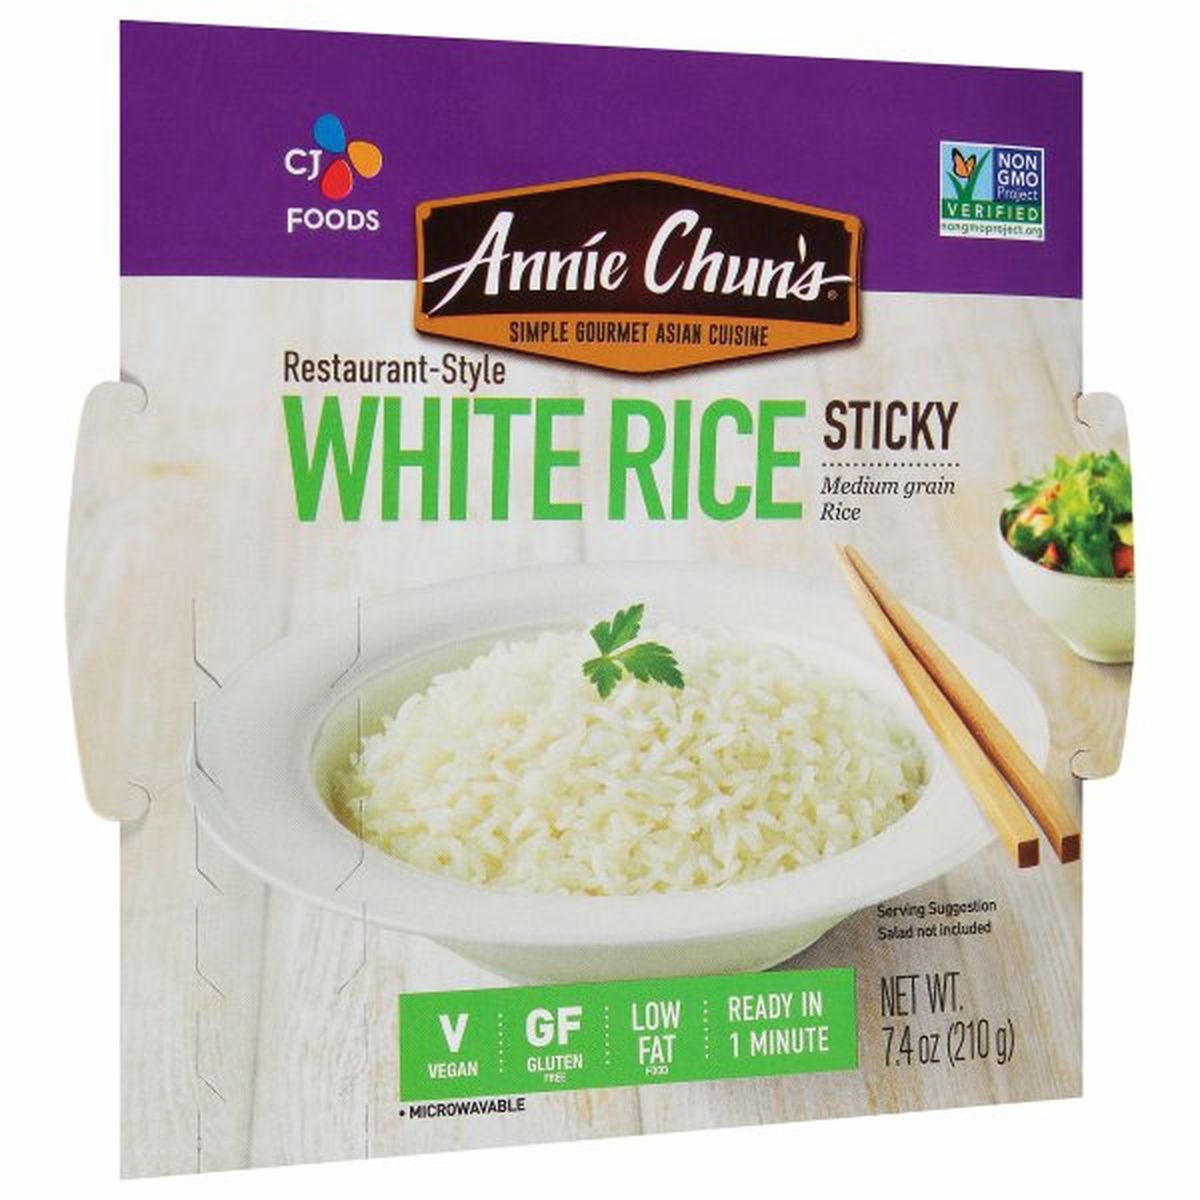 Calories in Anni Chun's White Rice, Sticky, Restaurant-Style